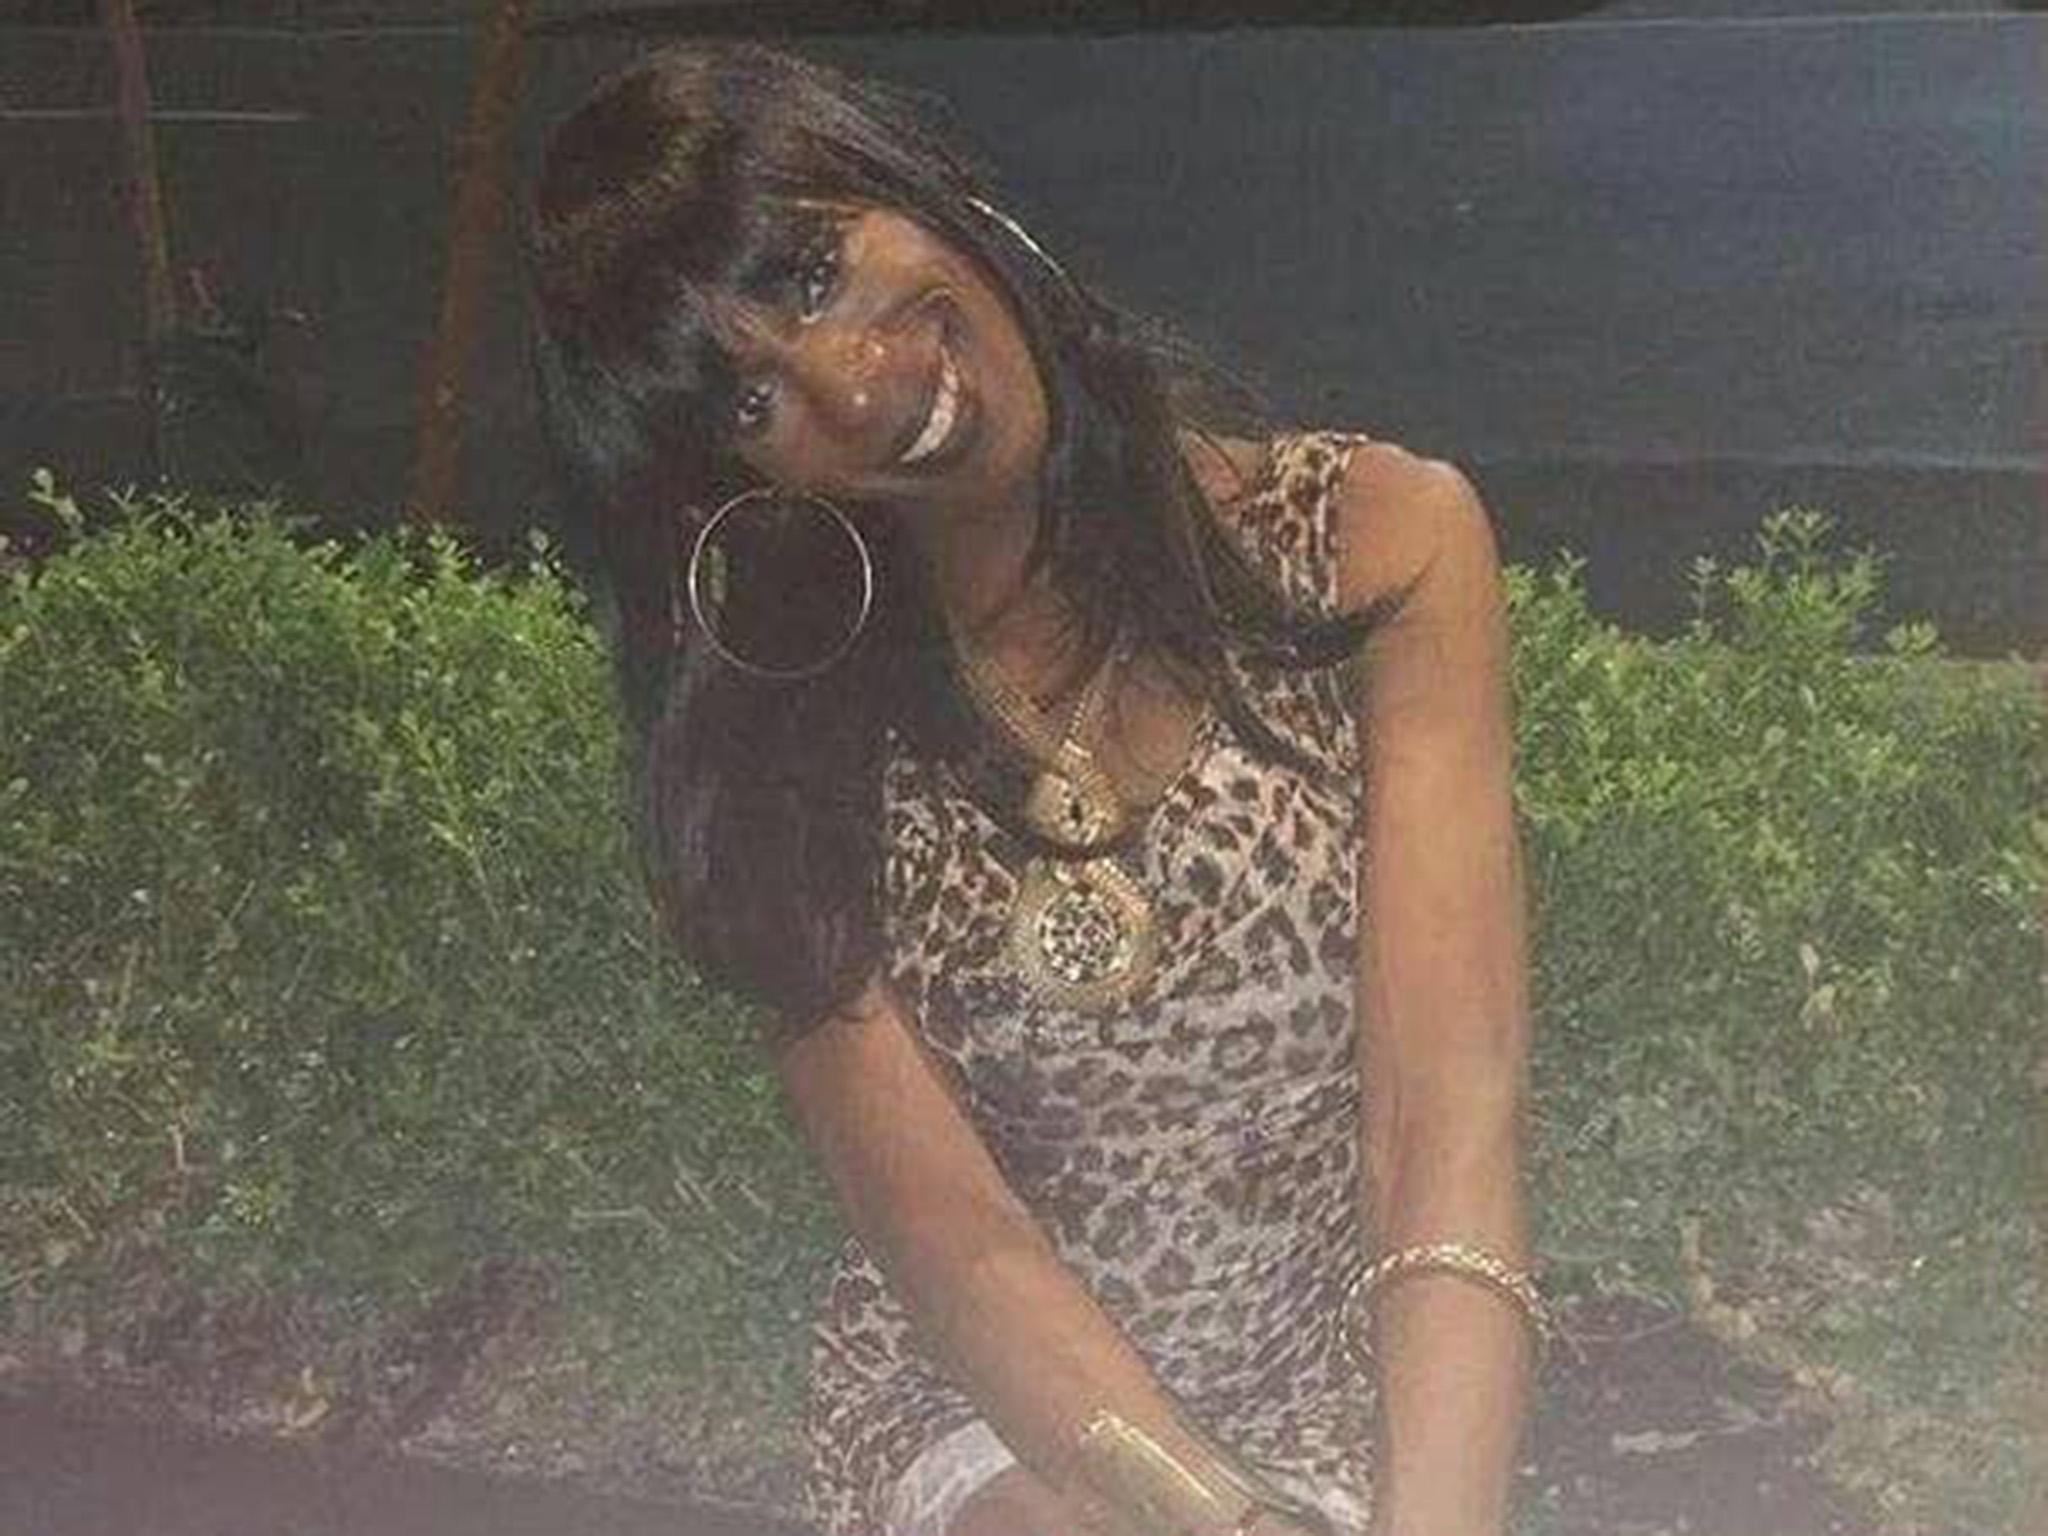 Monika Diamond, a 34-year-old businesswoman, was announced dead at the scene in the US city of Charlotte